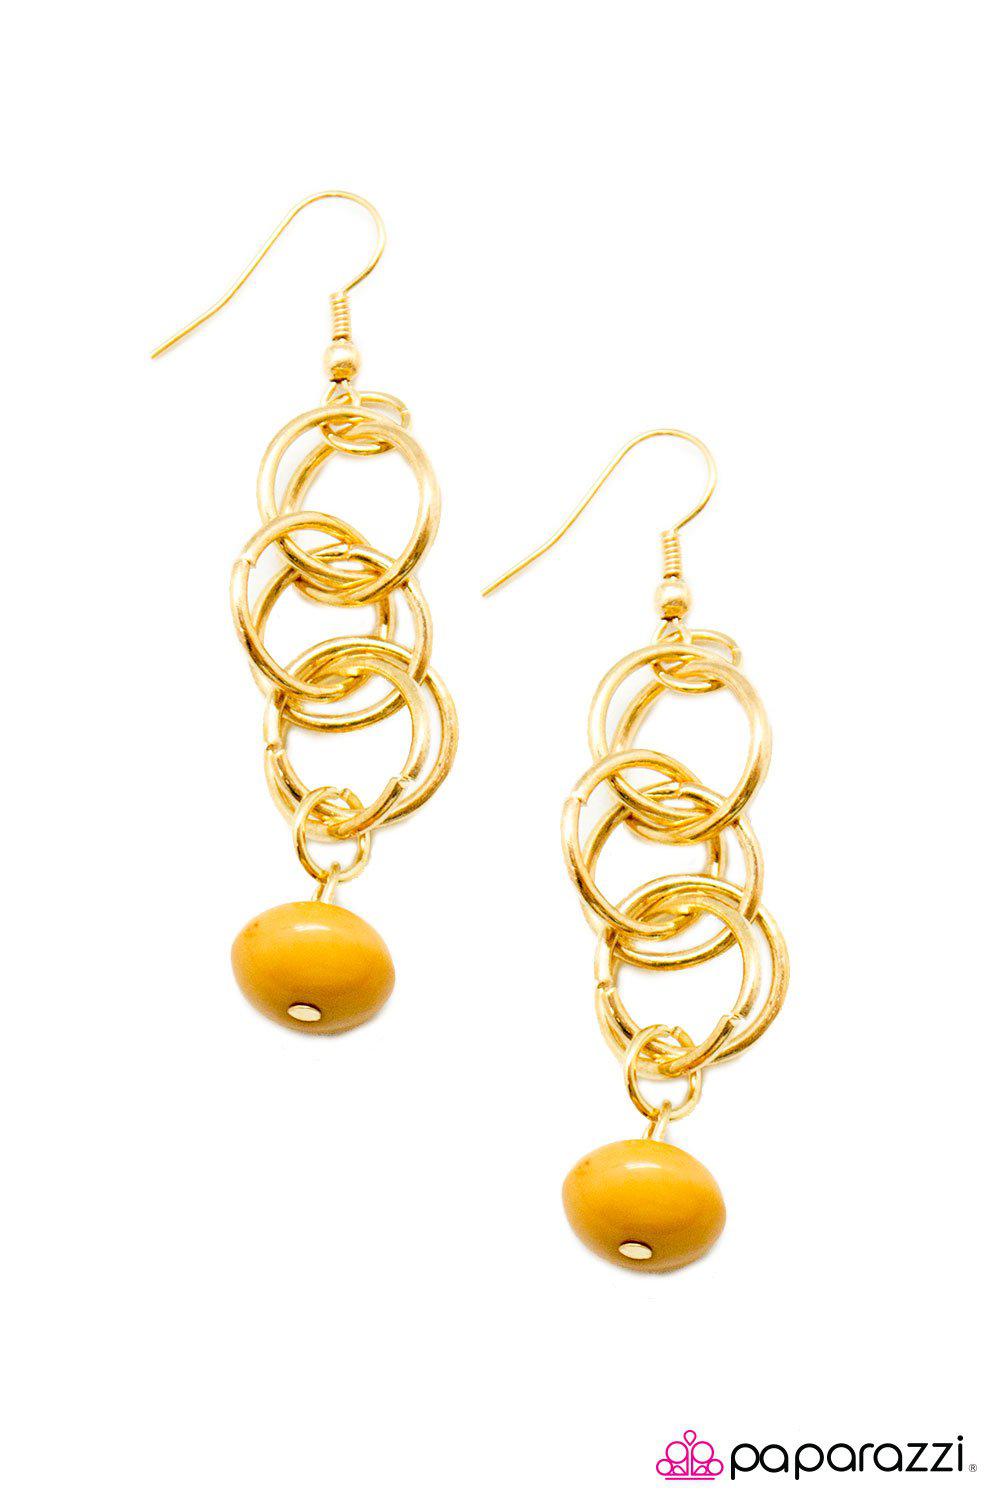 Marvelously Marvelous Yellow and Gold Earrings - Paparazzi Accessories-CarasShop.com - $5 Jewelry by Cara Jewels